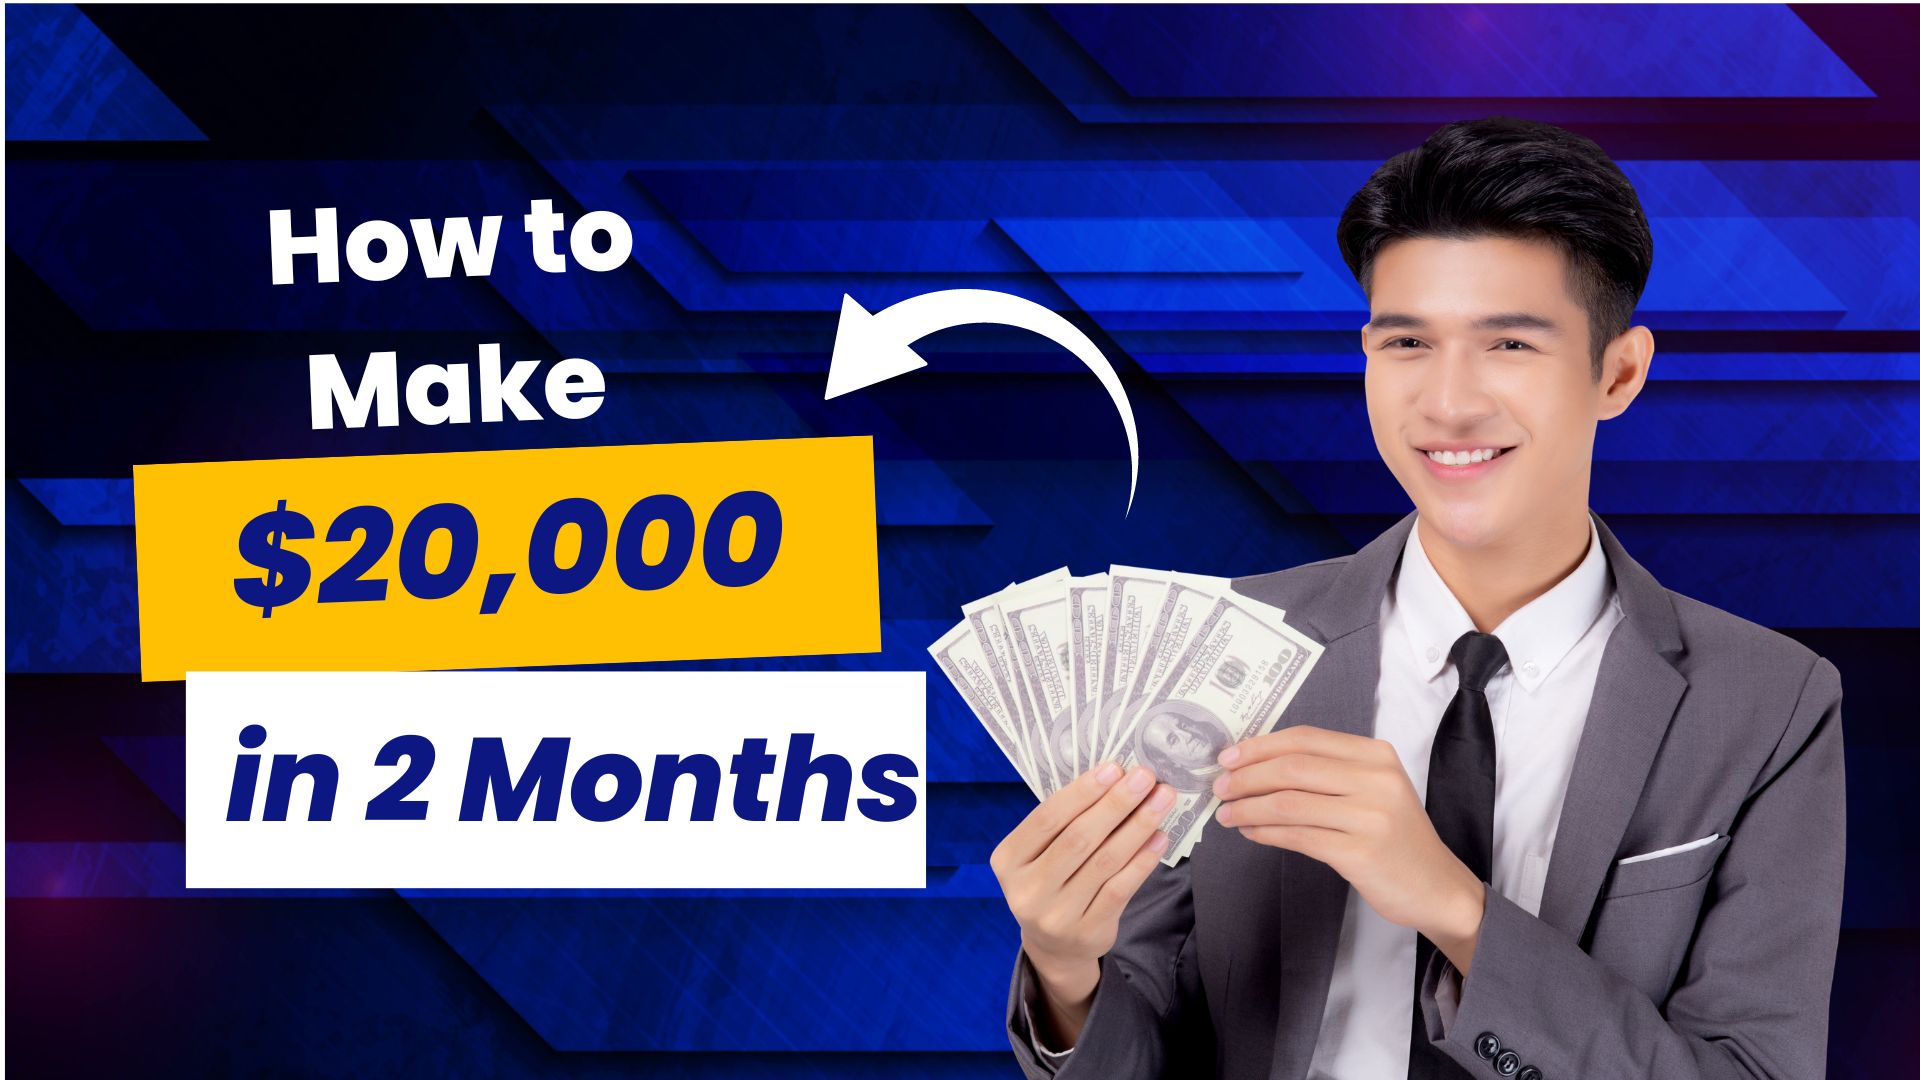 How to Make $20,000 in 2 Months